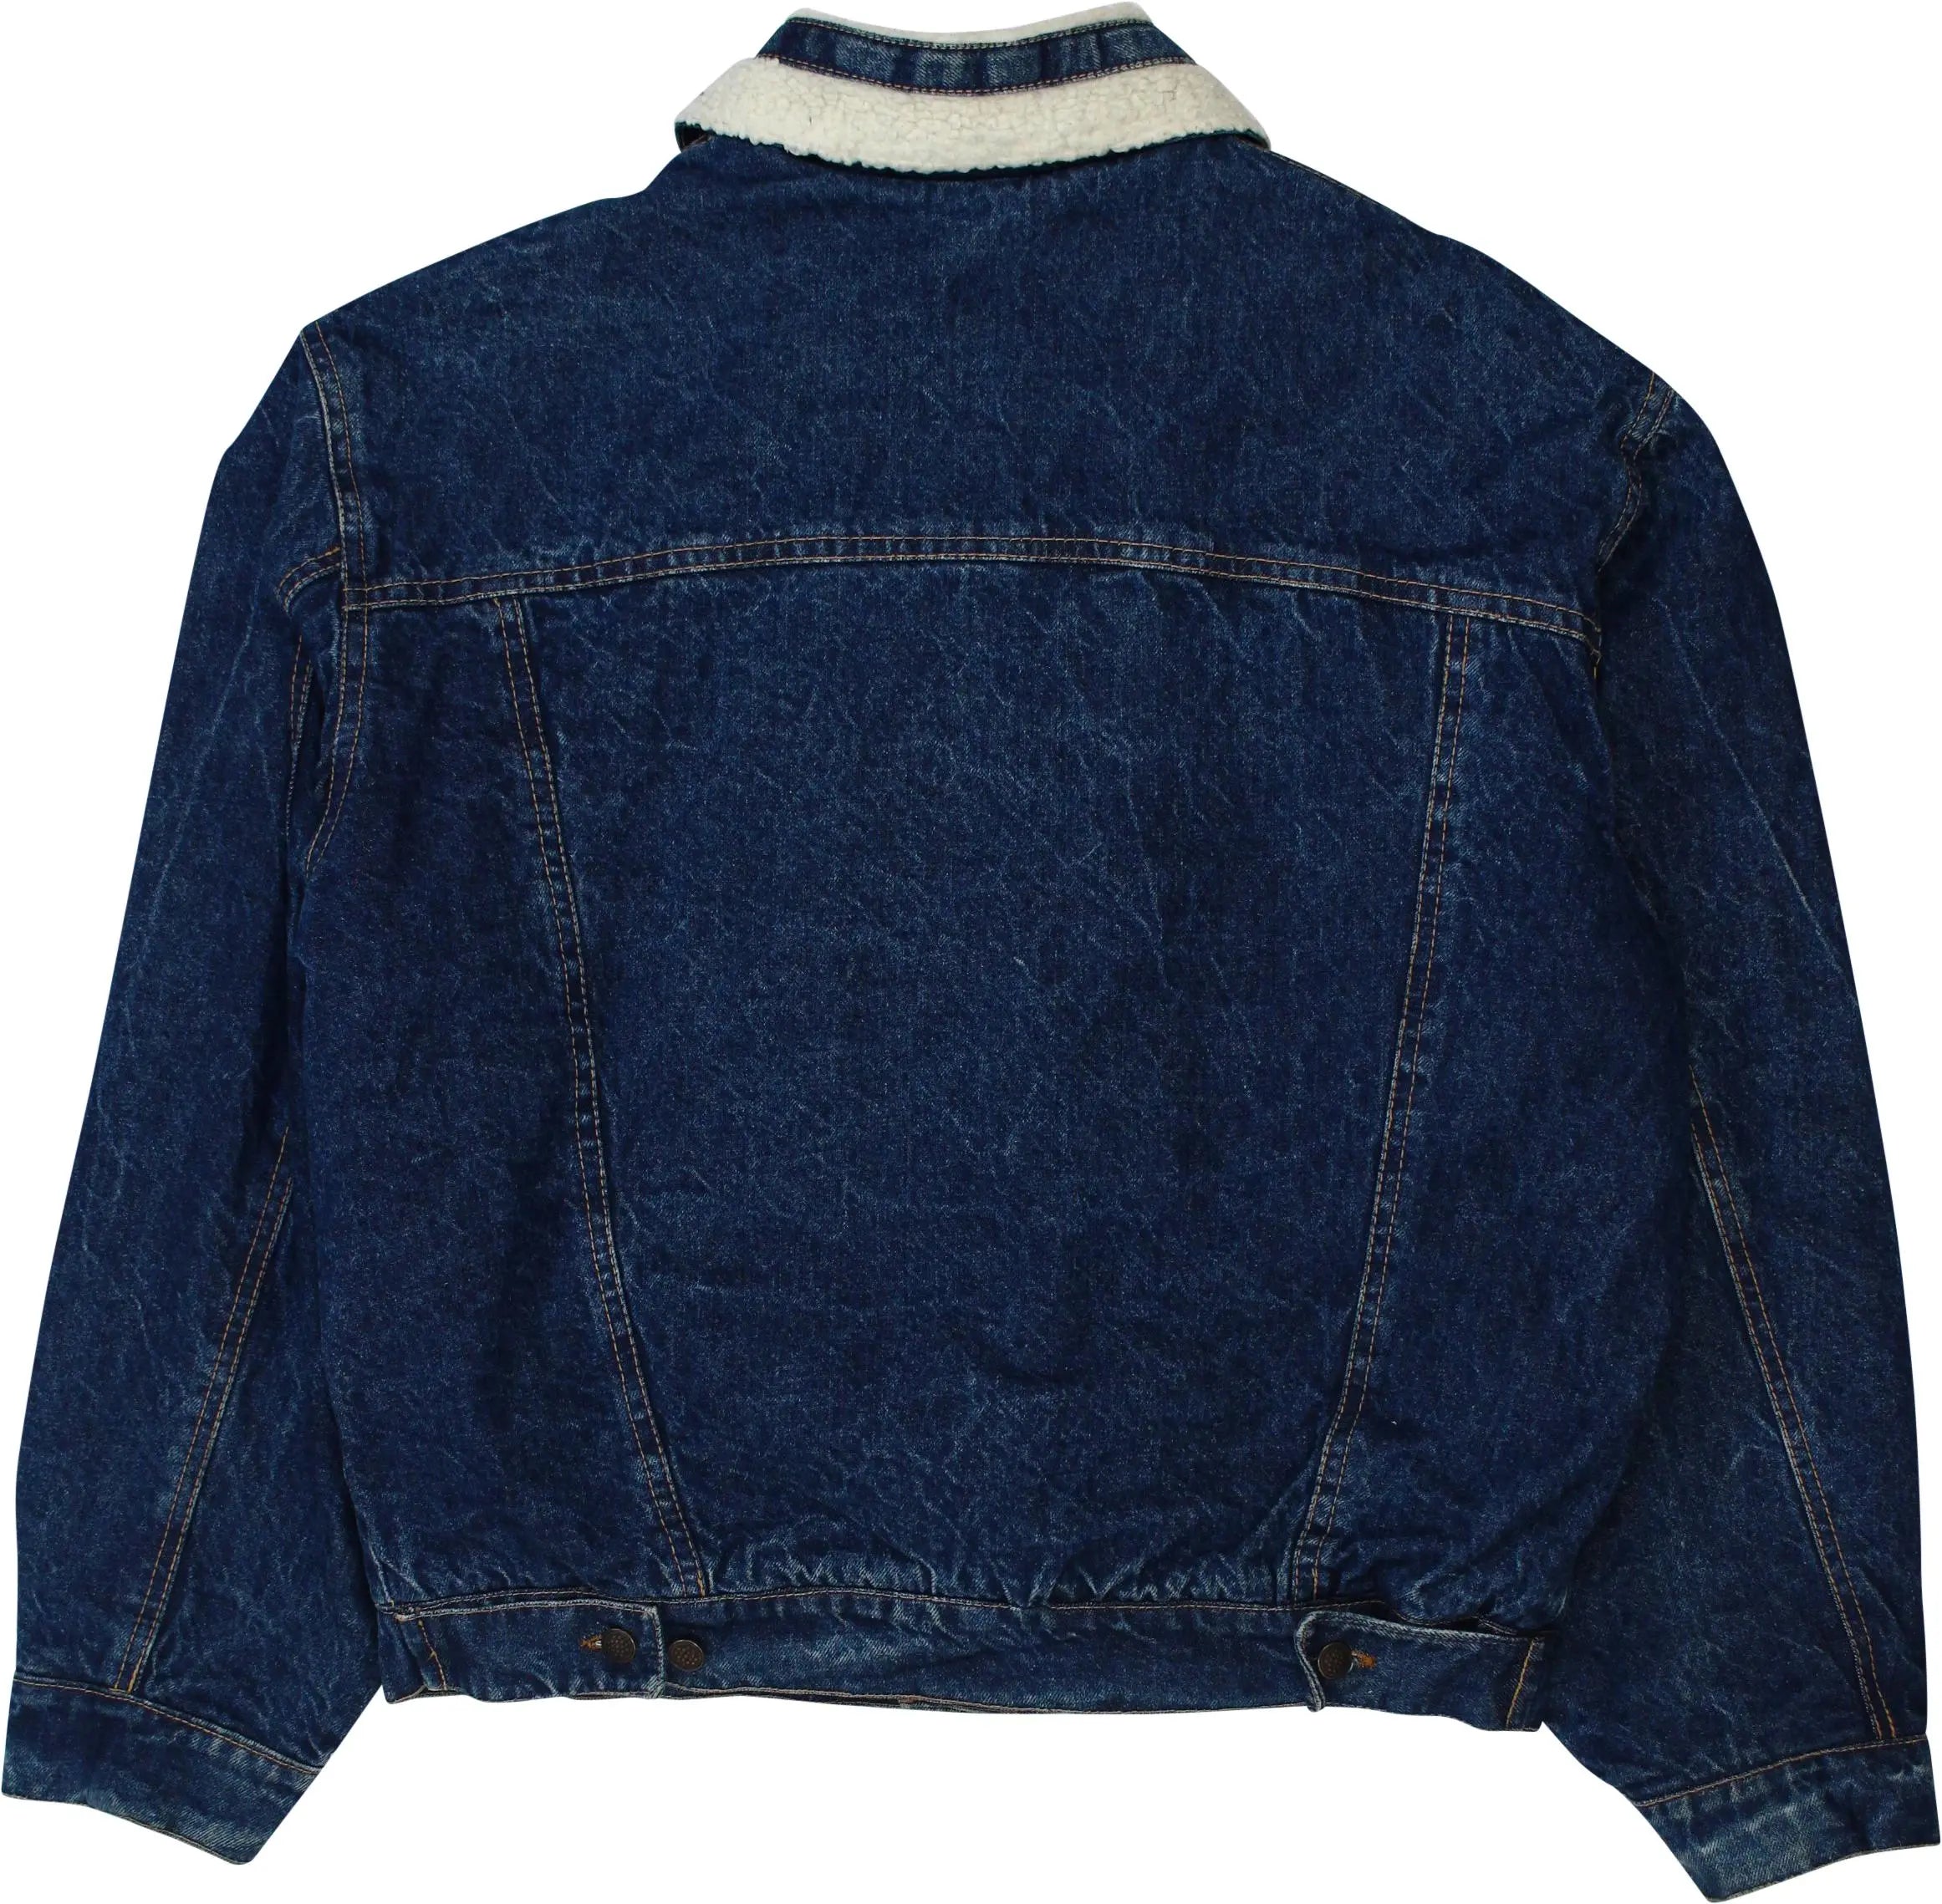 Unknown - 80s Teddy Denim Jacket- ThriftTale.com - Vintage and second handclothing